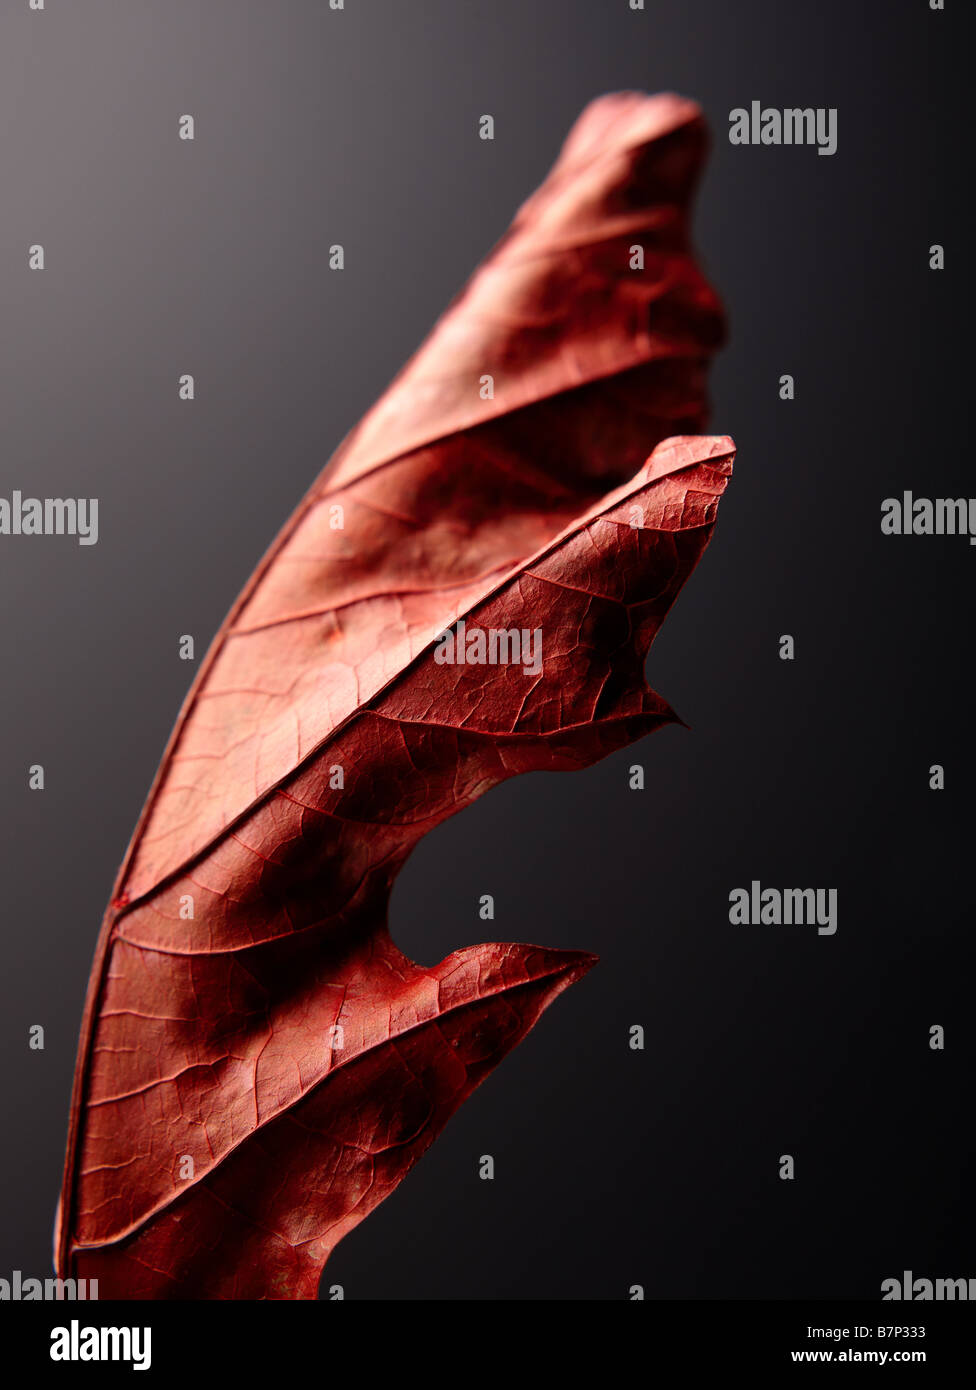 Studio shot of a red autumn leaf against a dark background Stock Photo